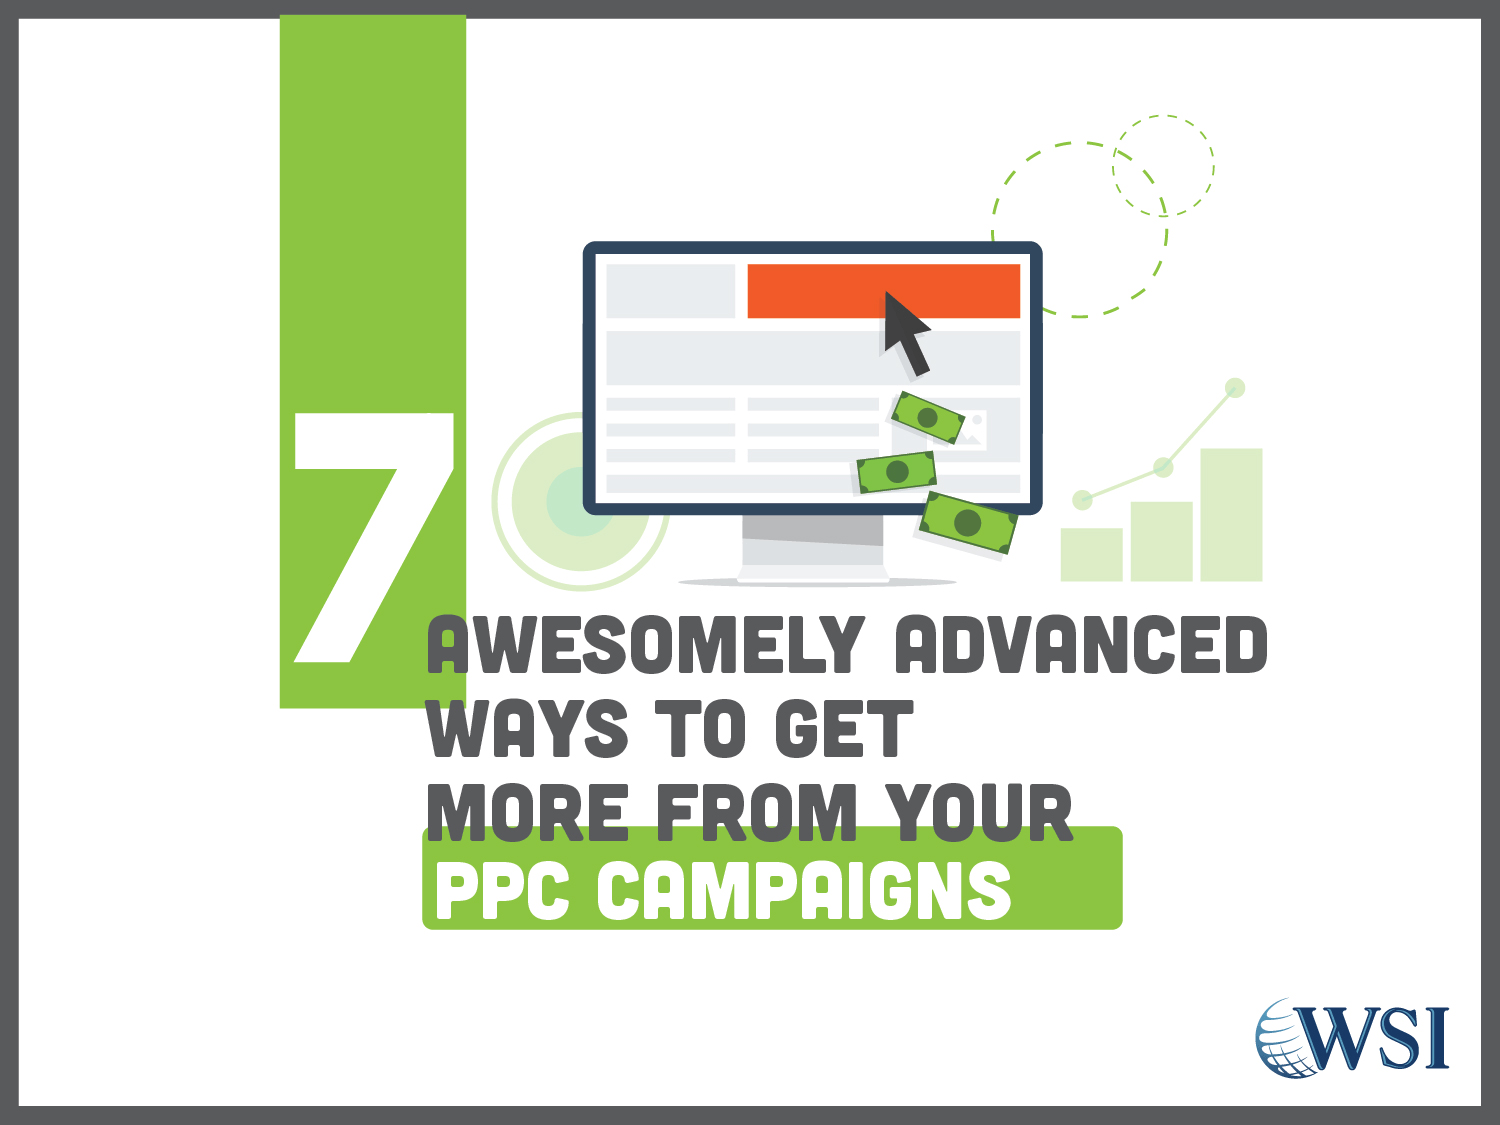 7 awesomely advanced ways for PPC campaigns ebook